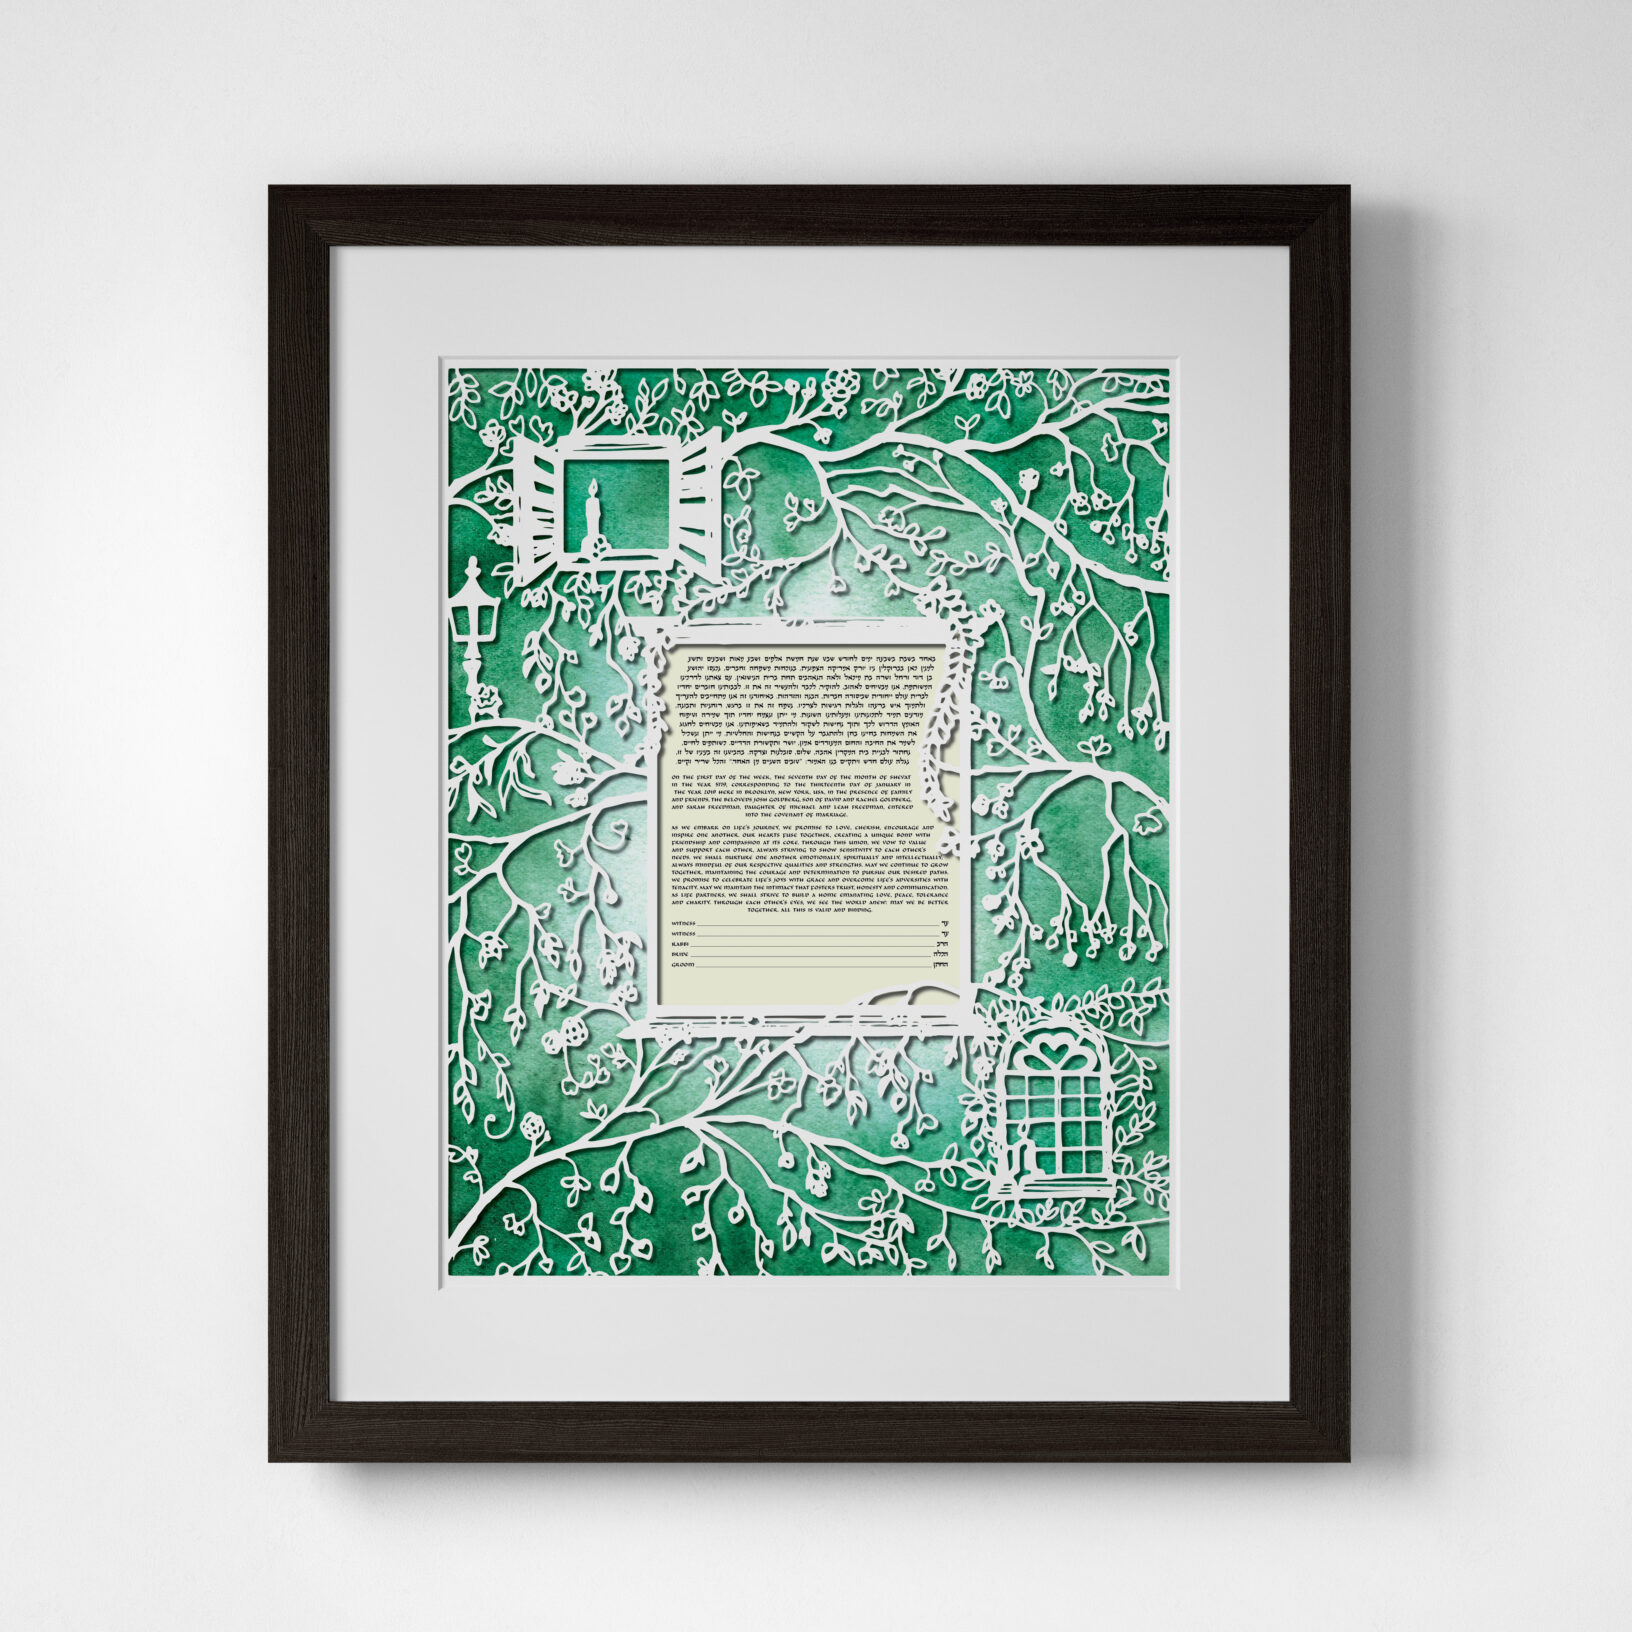 Melody Molayem Papercut Vineyard Window Papercut Green Ketubah Marriage Contracts